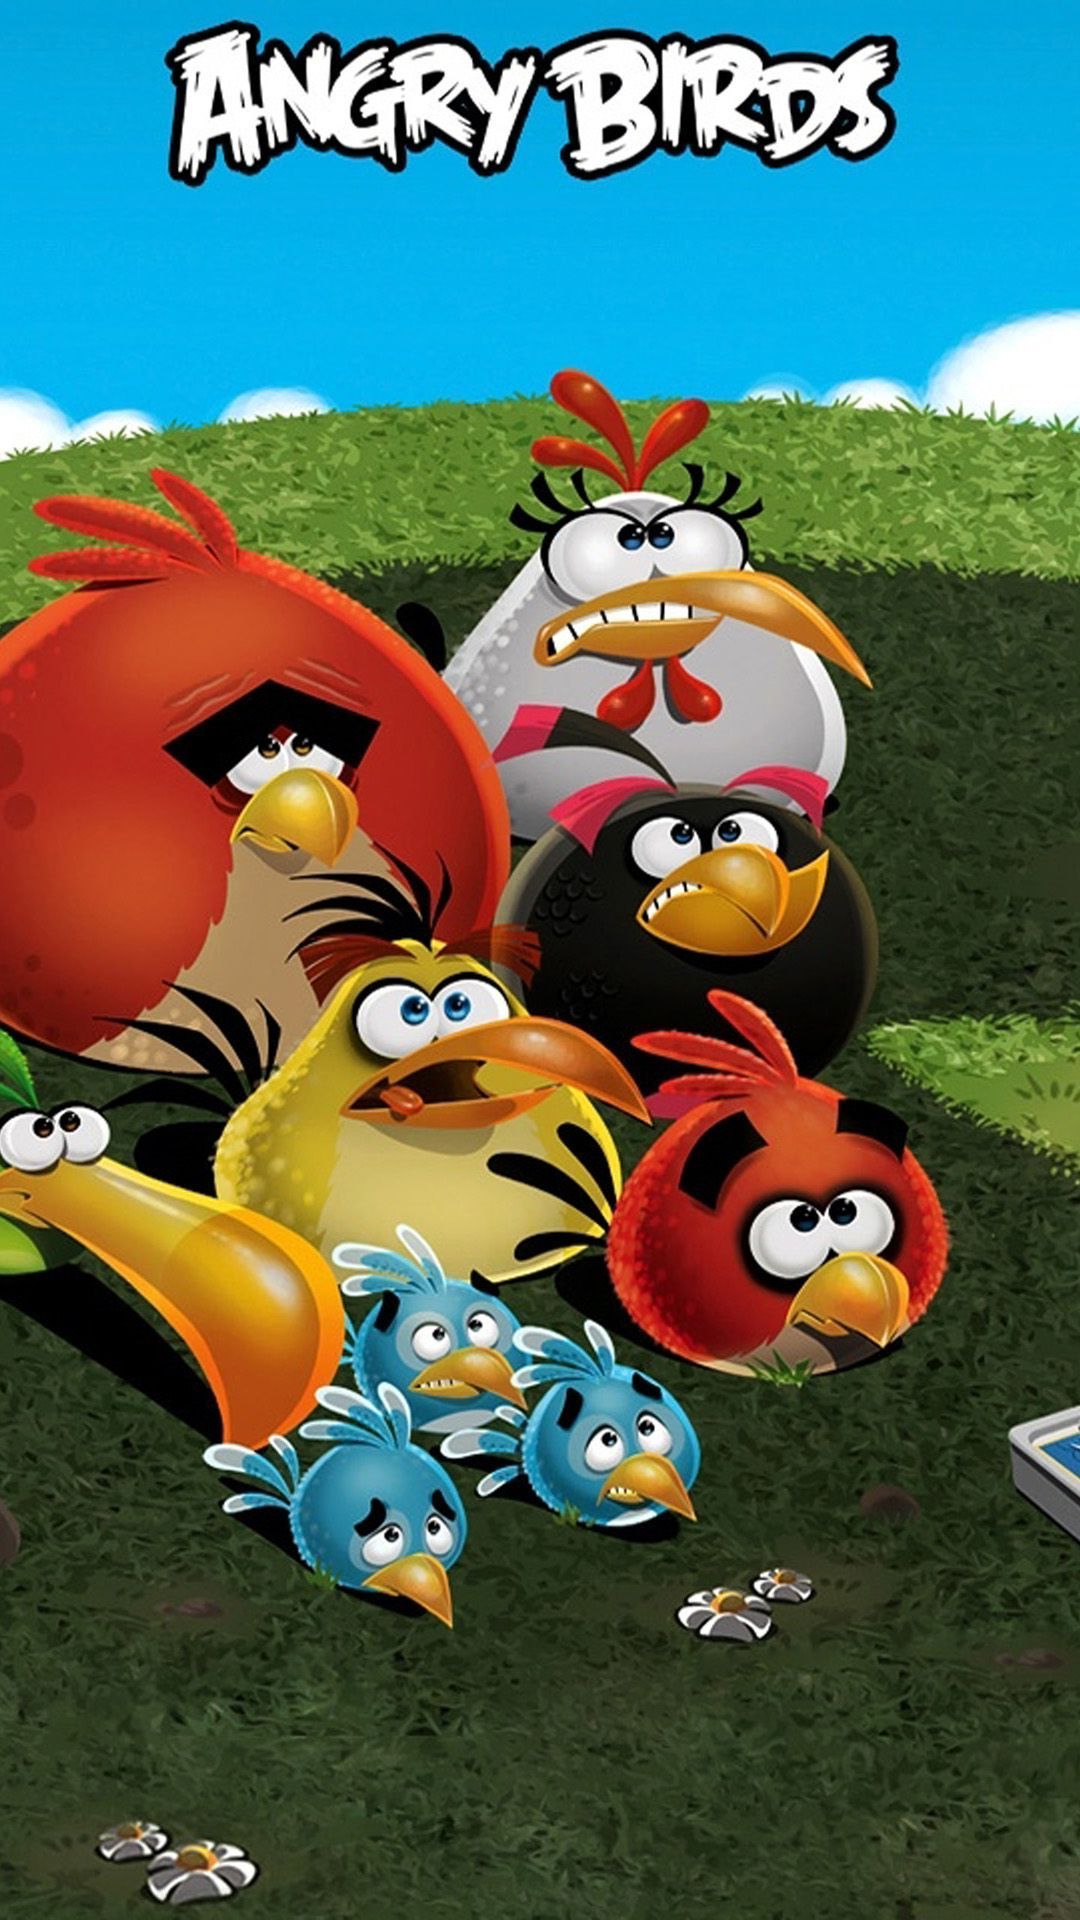 Angry Birds iPhone Wallpaper Free Angry Birds iPhone Background